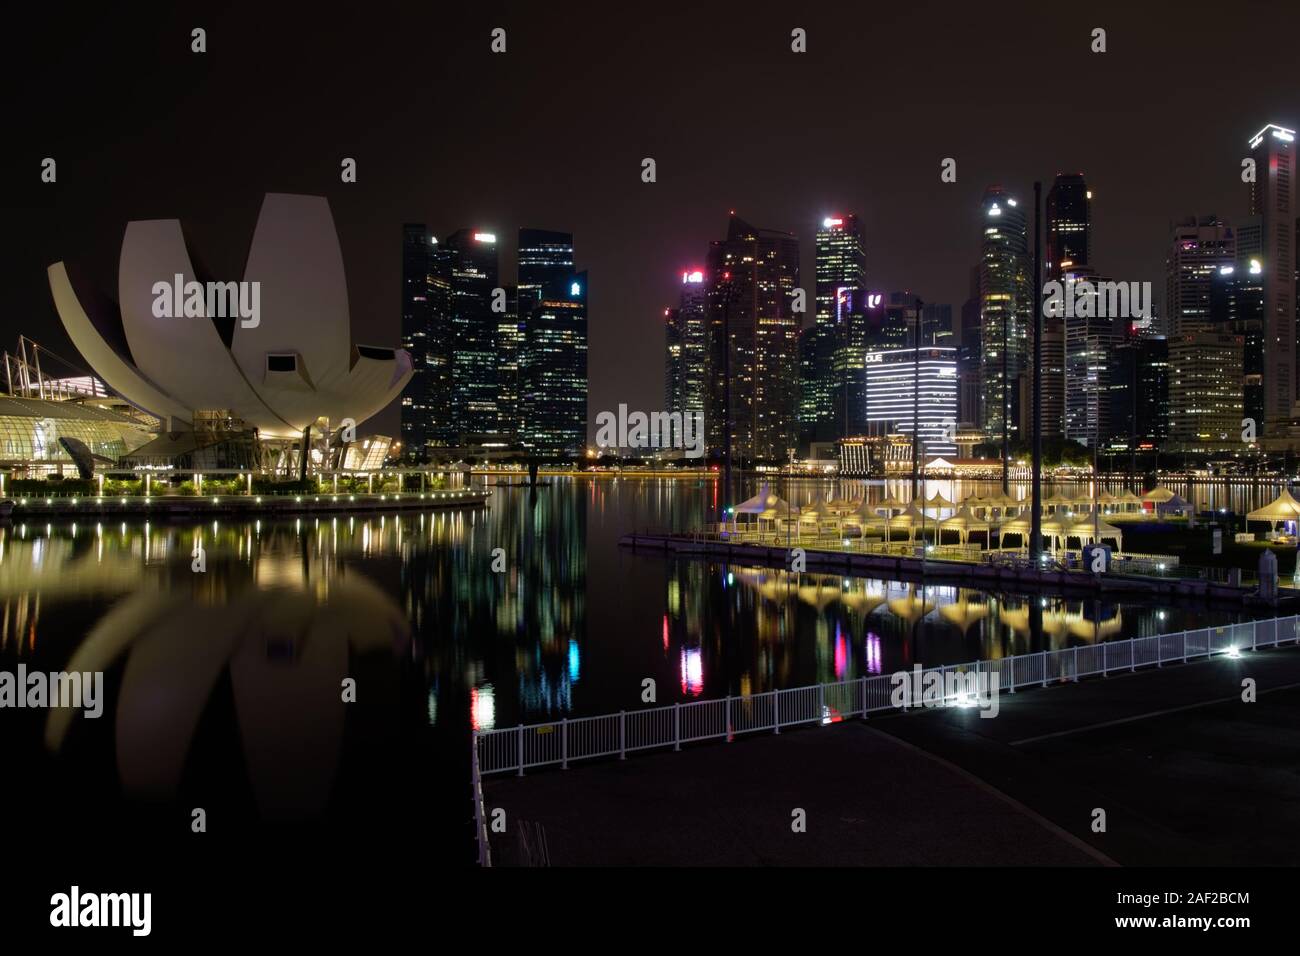 Panorama of Marina Bay water reflection colours at night, with viewpoint lotos flower shape building and skyscrapers in background Stock Photo